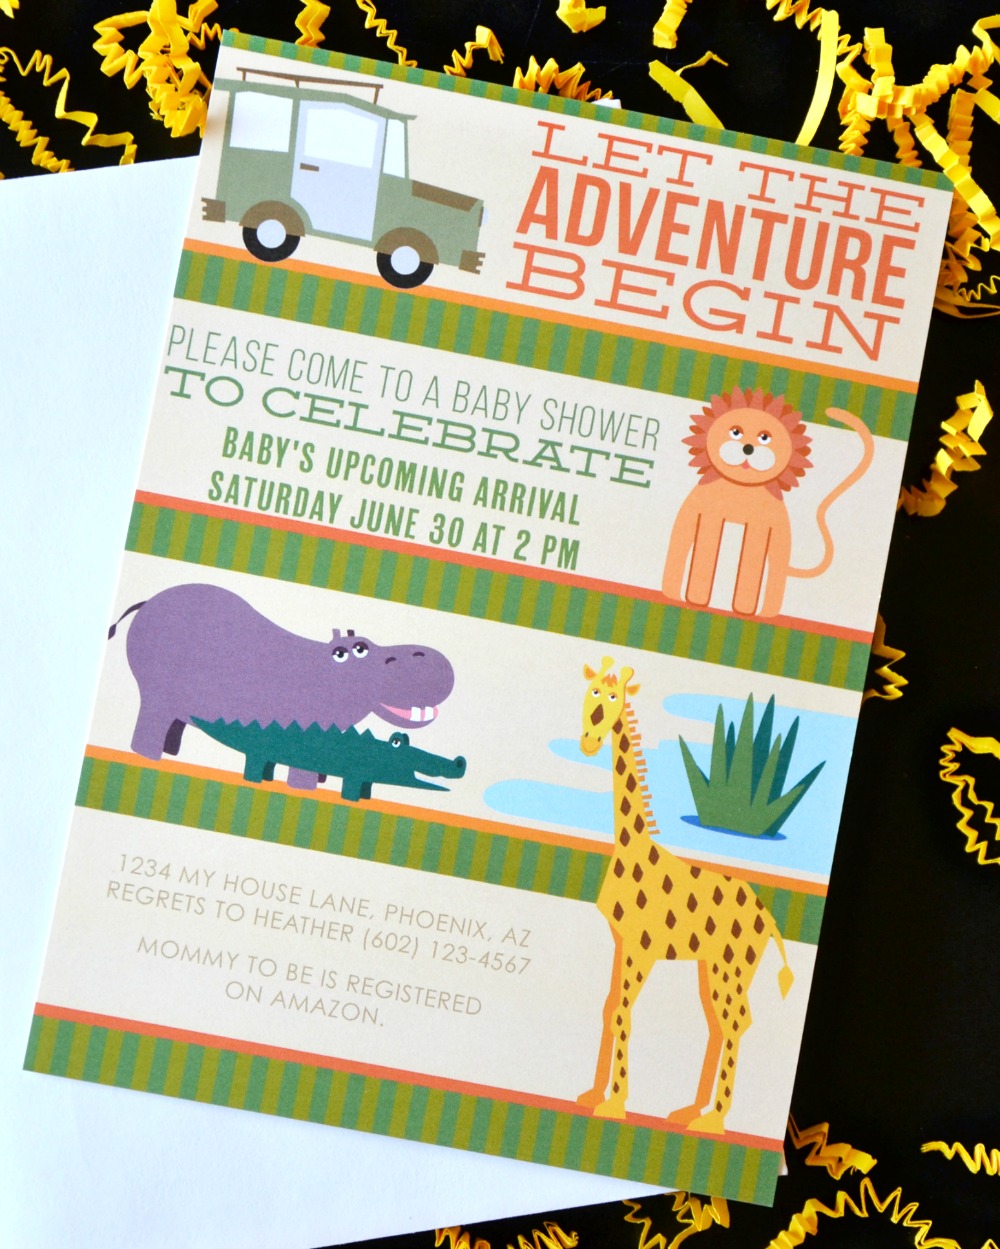 Plan an animal themed baby shower with these cute safari invitations.